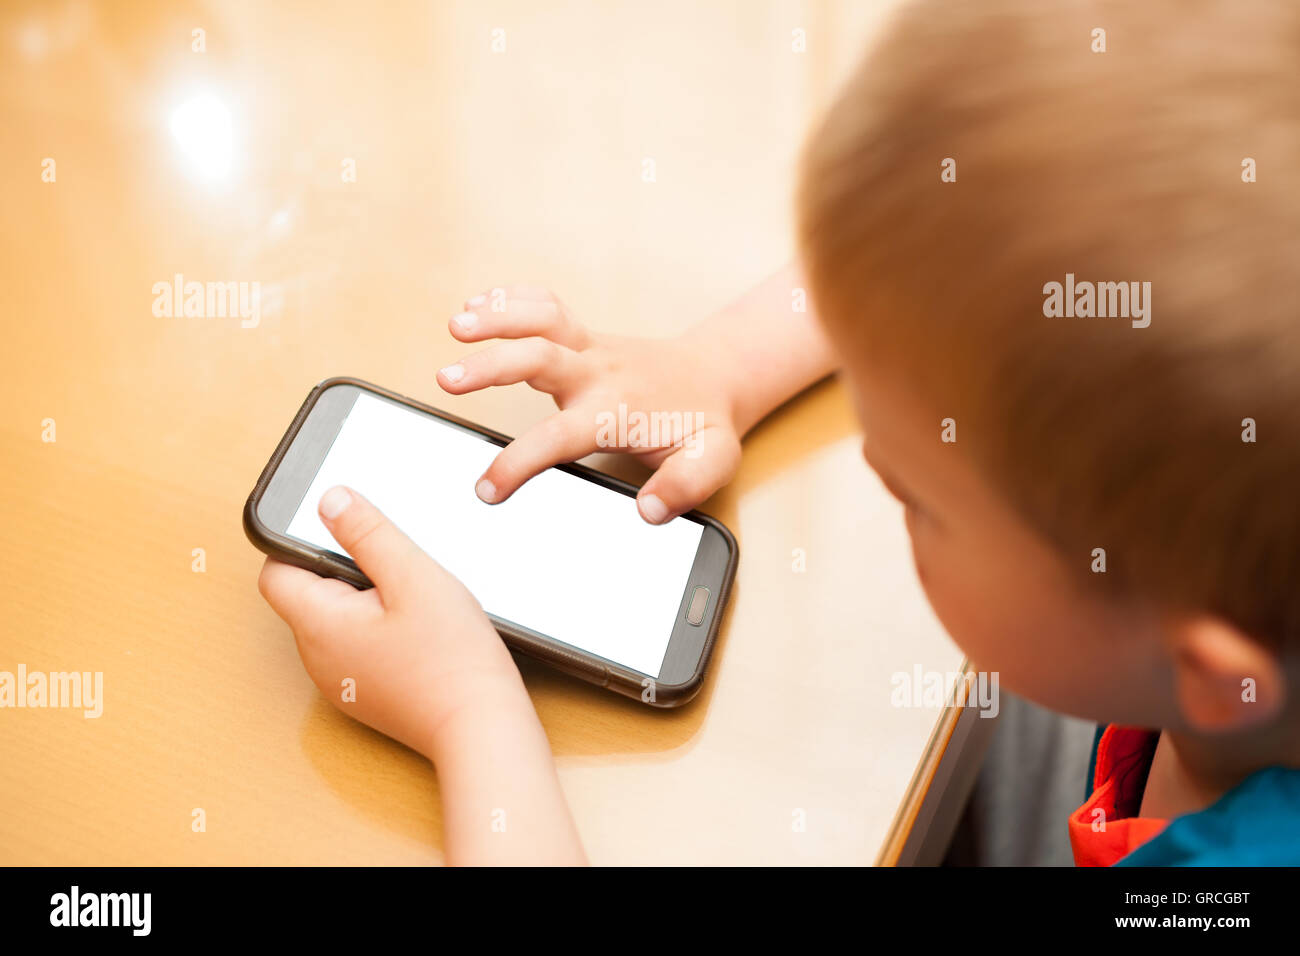 Young boy plays with a smart phone Stock Photo